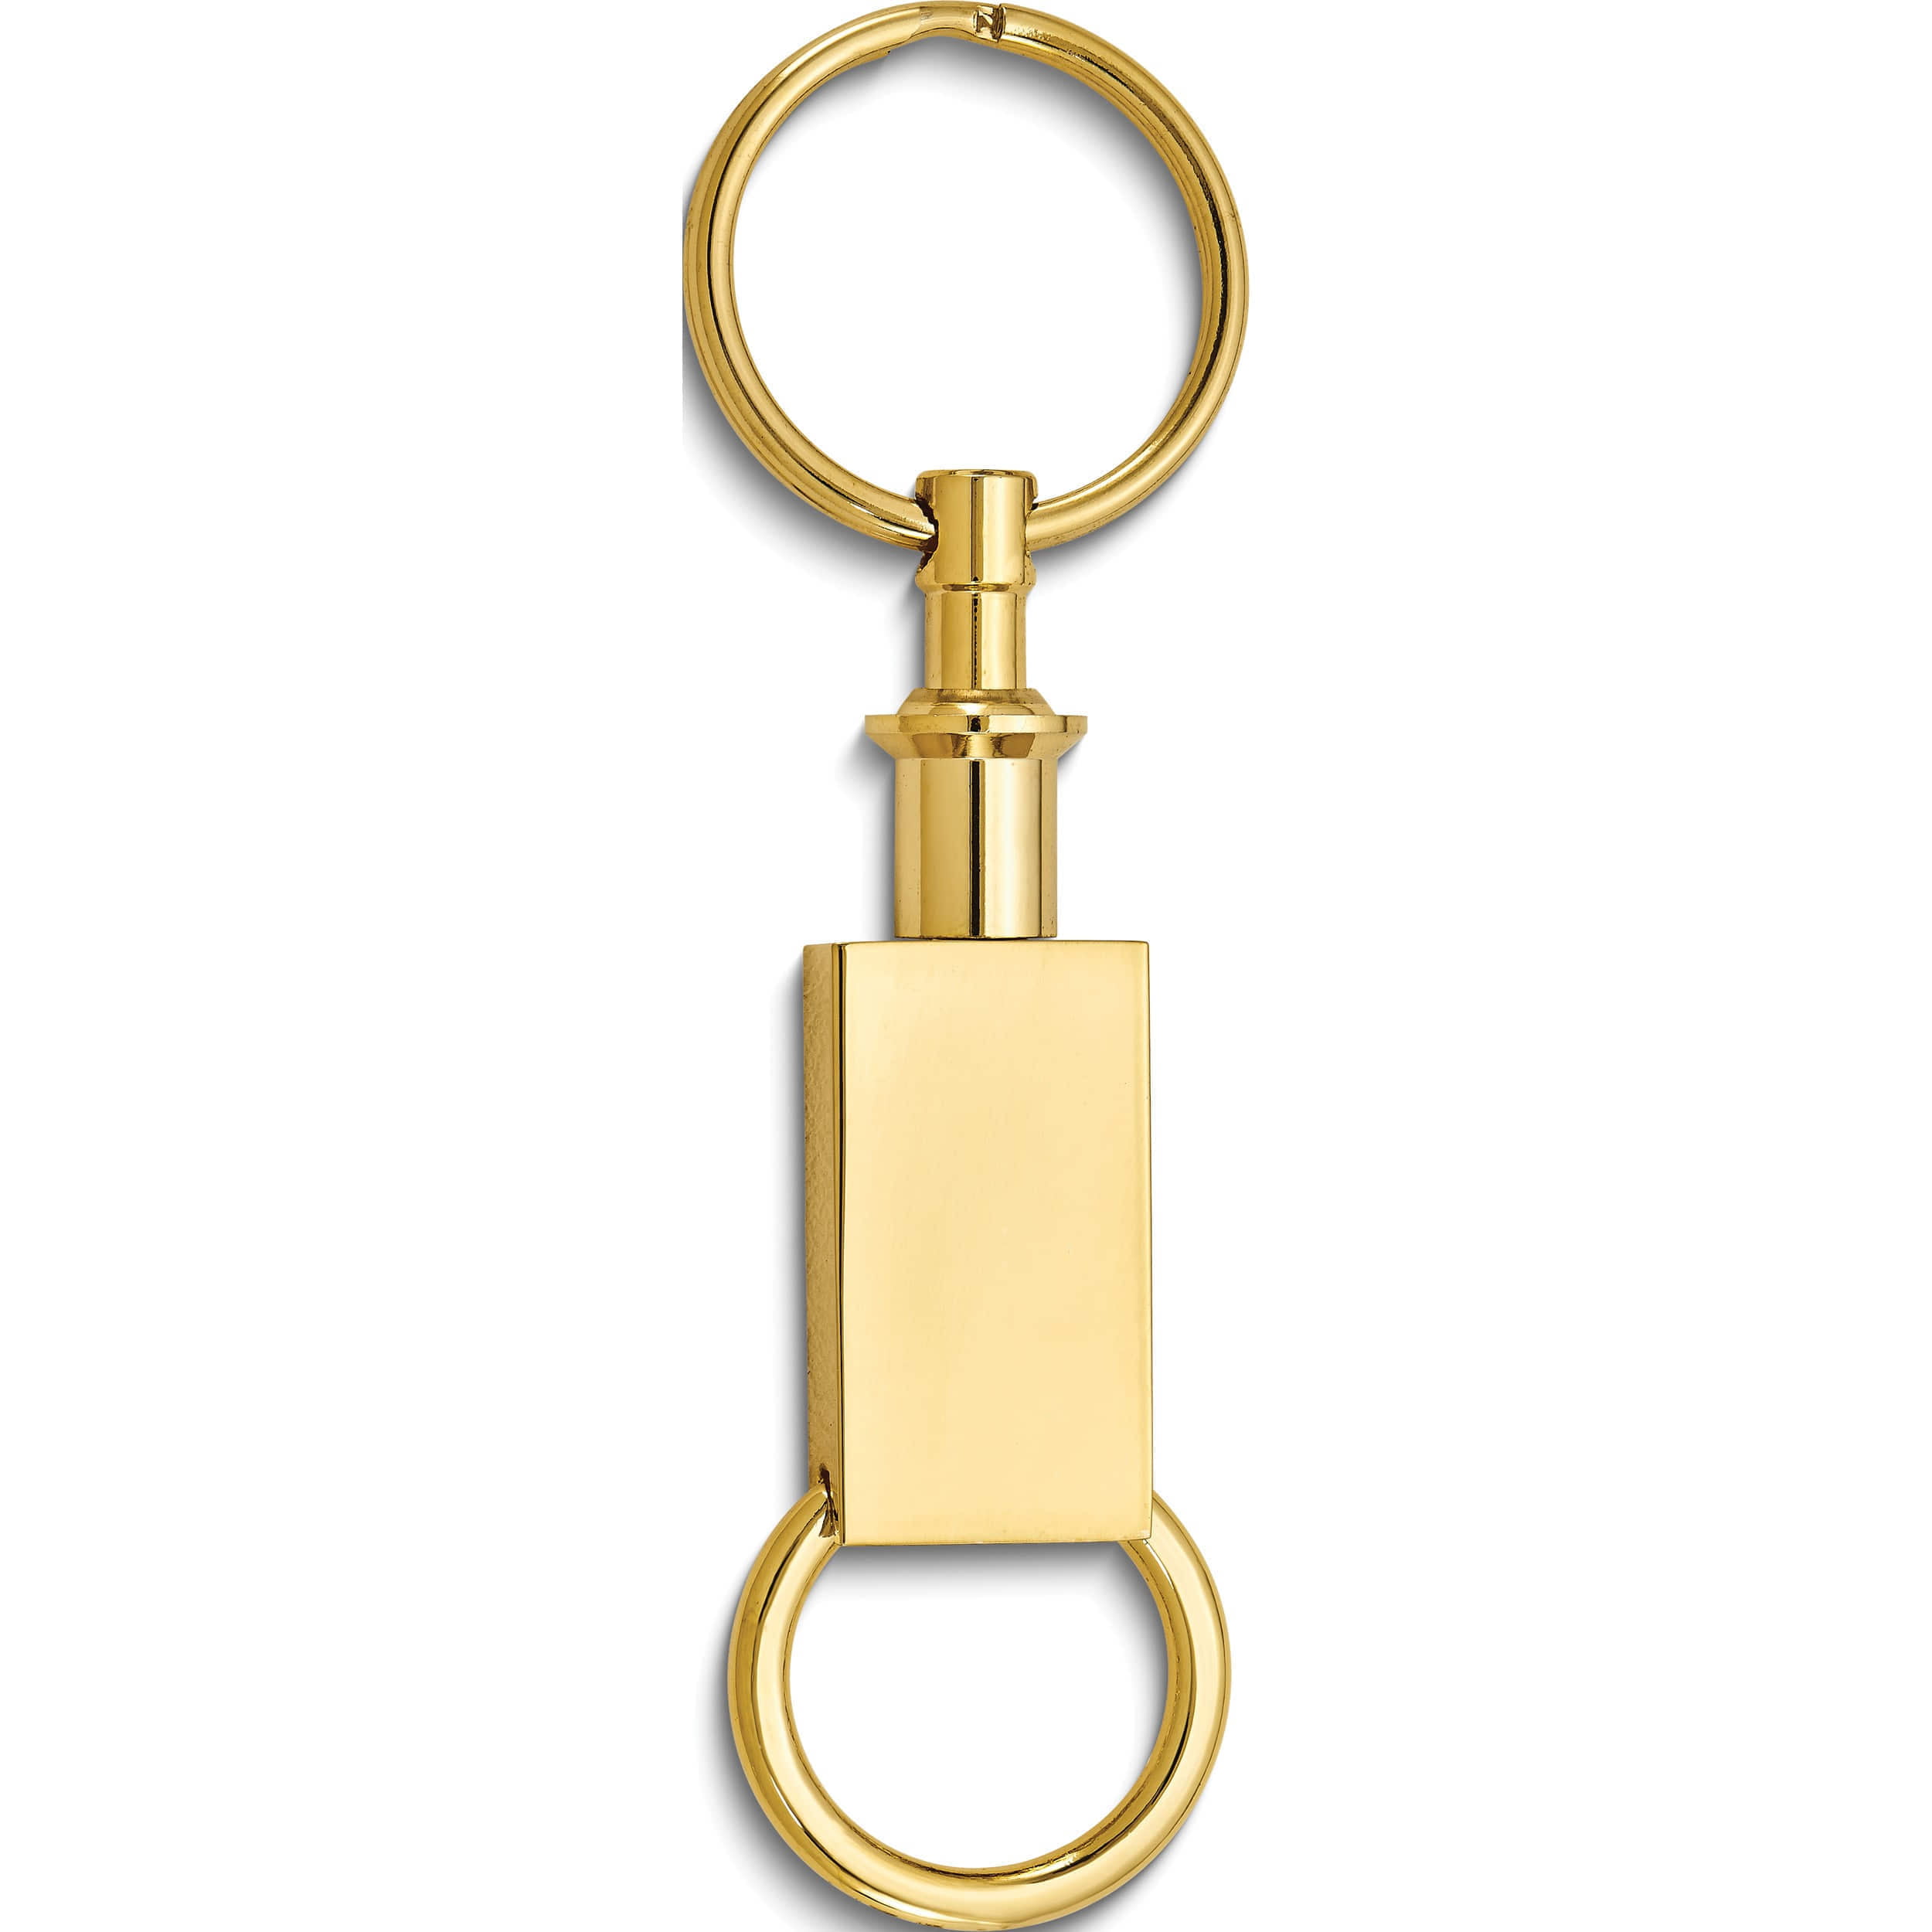 Fashion Gold-Tone Valet Key Ring (0.5 X 4) Made In China gm4934